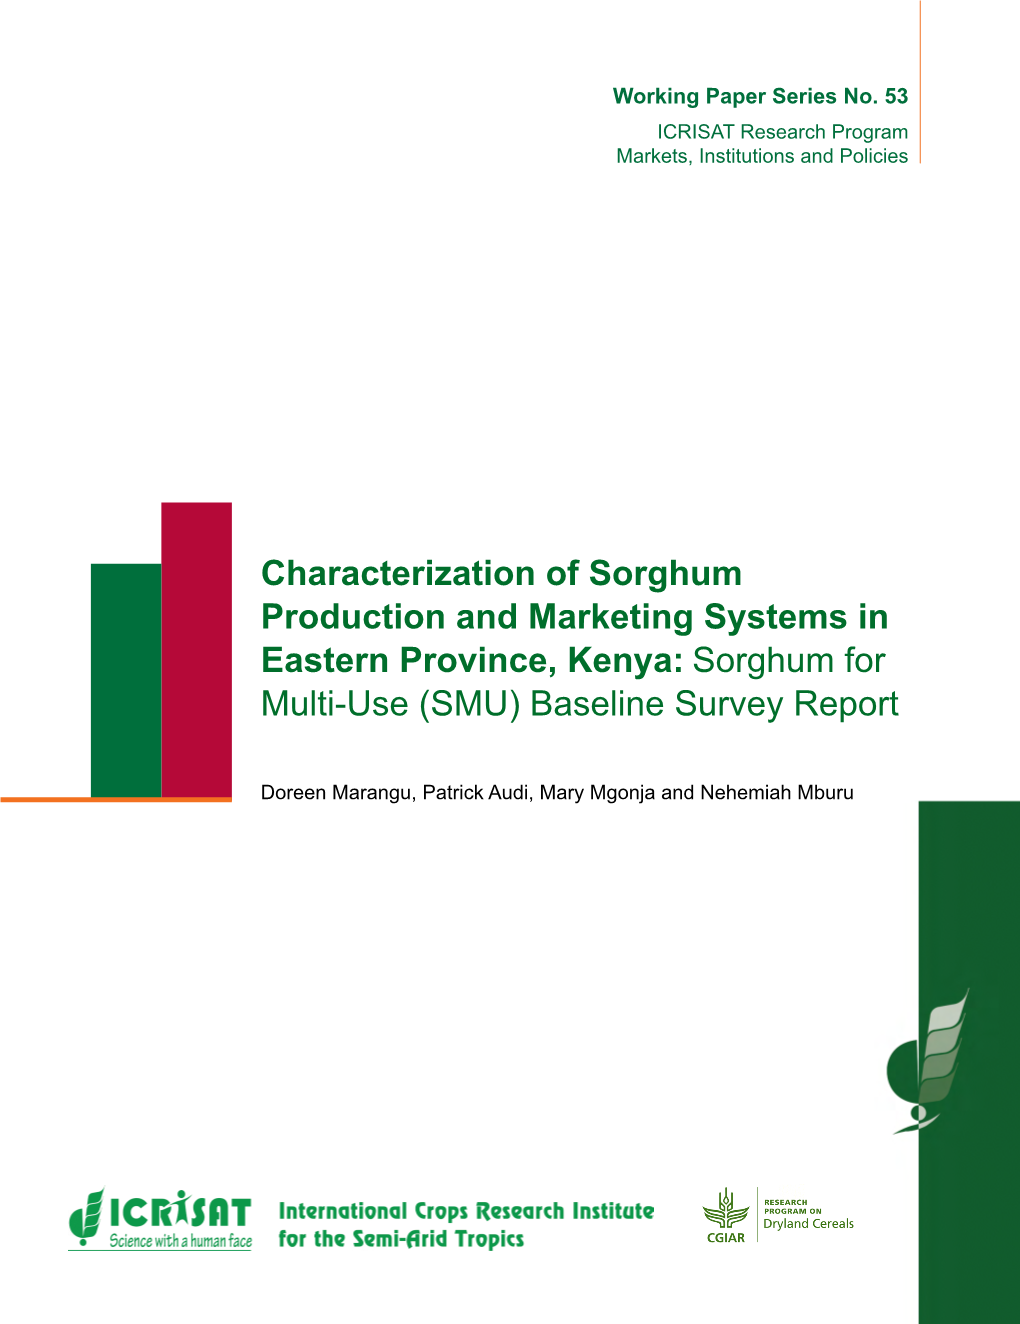 Characterization of Sorghum Production and Marketing Systems in Eastern Province, Kenya: Sorghum for Multi-Use (SMU) Baseline Survey Report